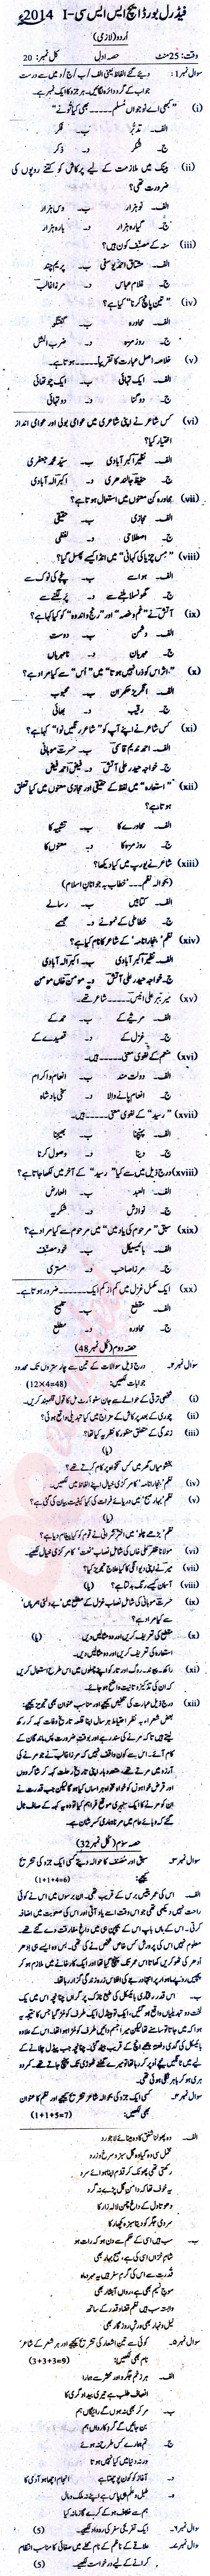 Urdu 11th class Past Paper Group 1 Federal BISE  2014